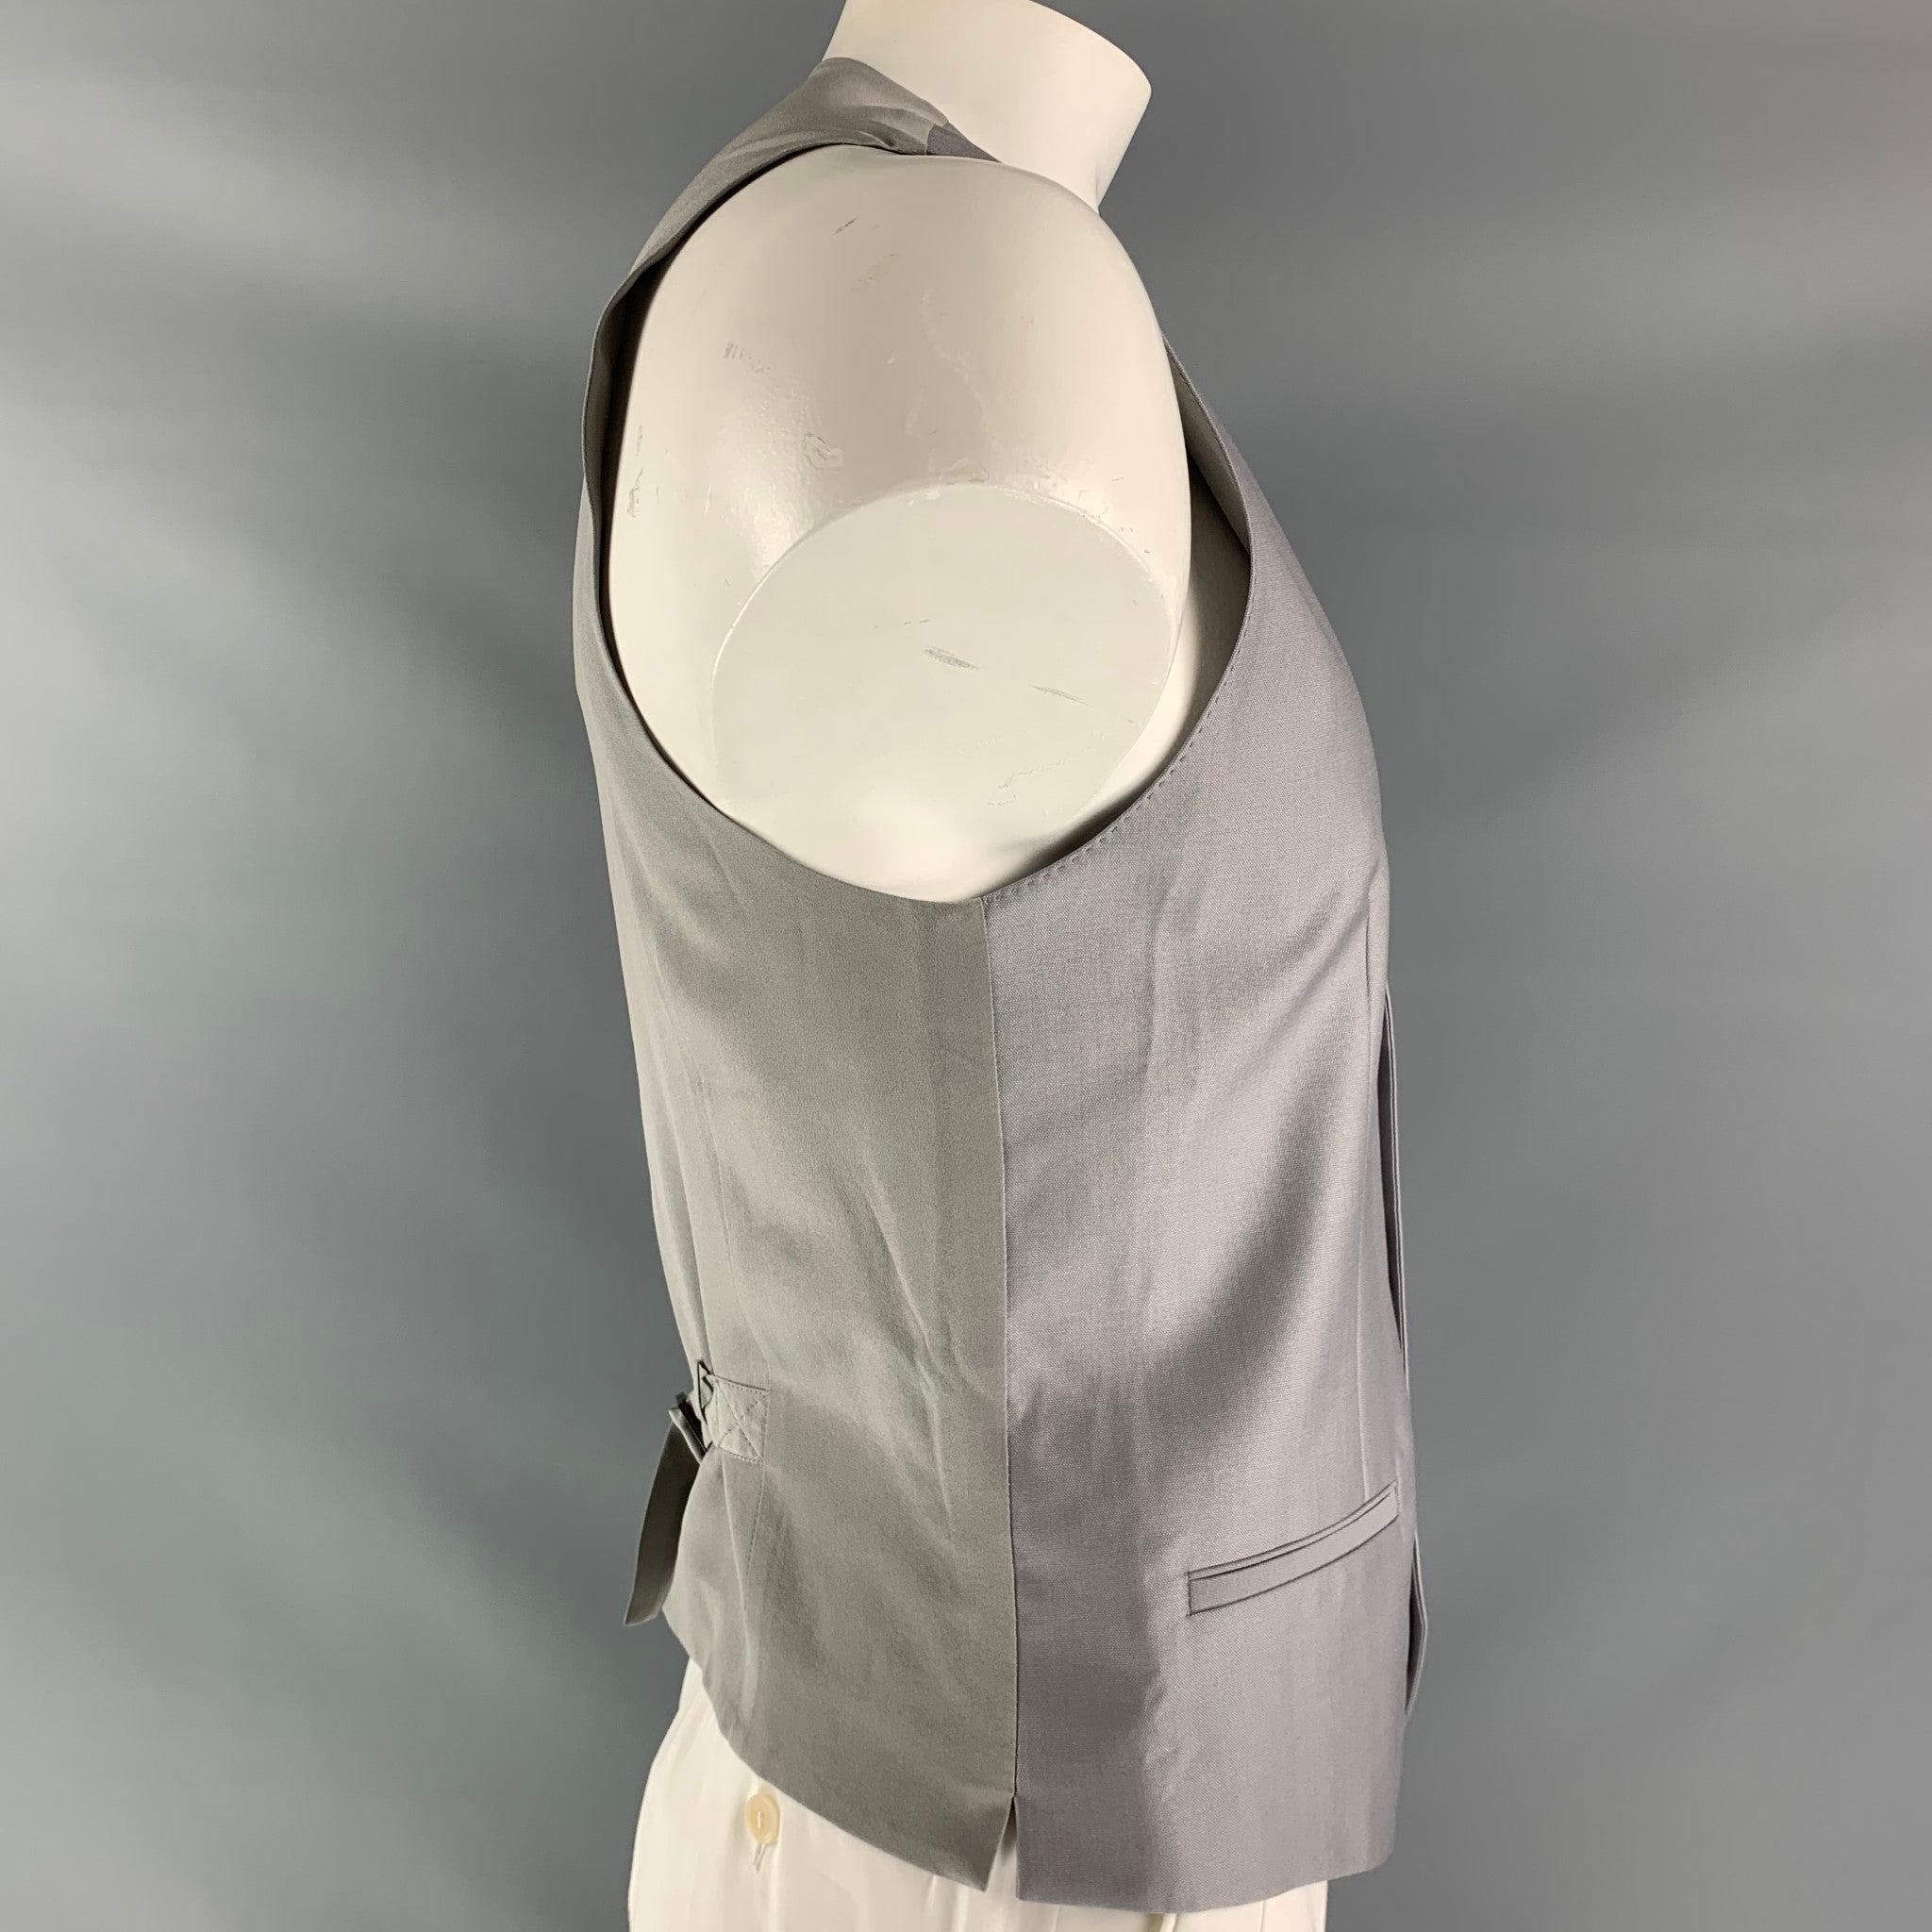 DOLCE & GABBANA dress vest comes in light gray wool fabric, full lined featuring V-neck, welt pockets, five buttons down closure, grey silk fabric at back and adjustable belt. Made in Italy.Excellent Pre-Owned Condition.  

Marked:   58 IT